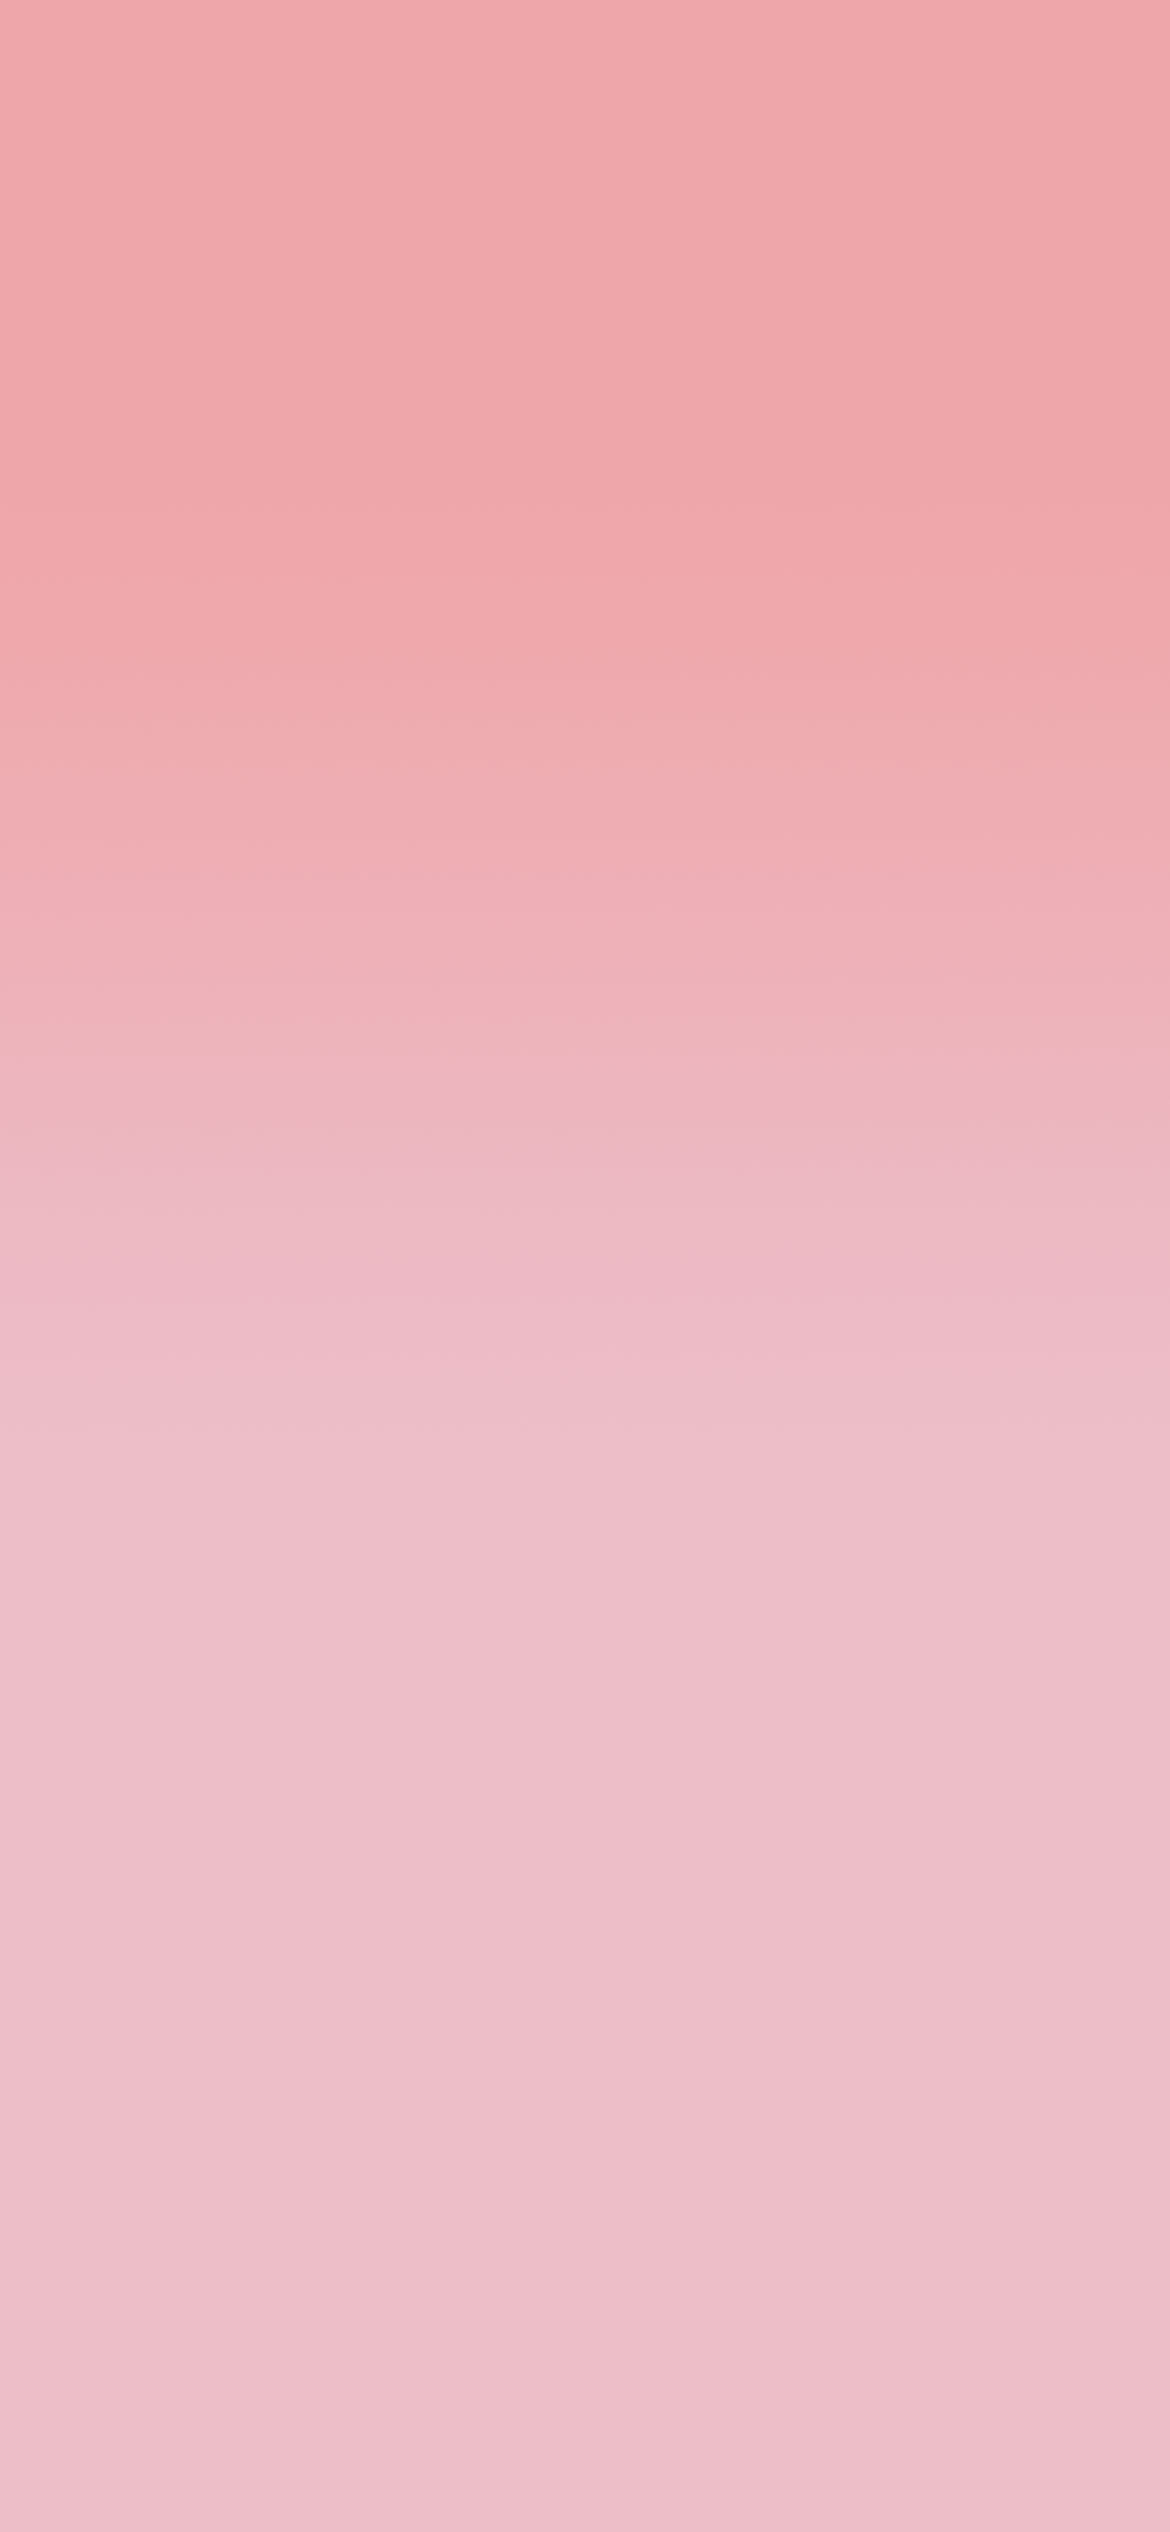 Pink Aesthetic Picture : Gradient Pink Wallpaper